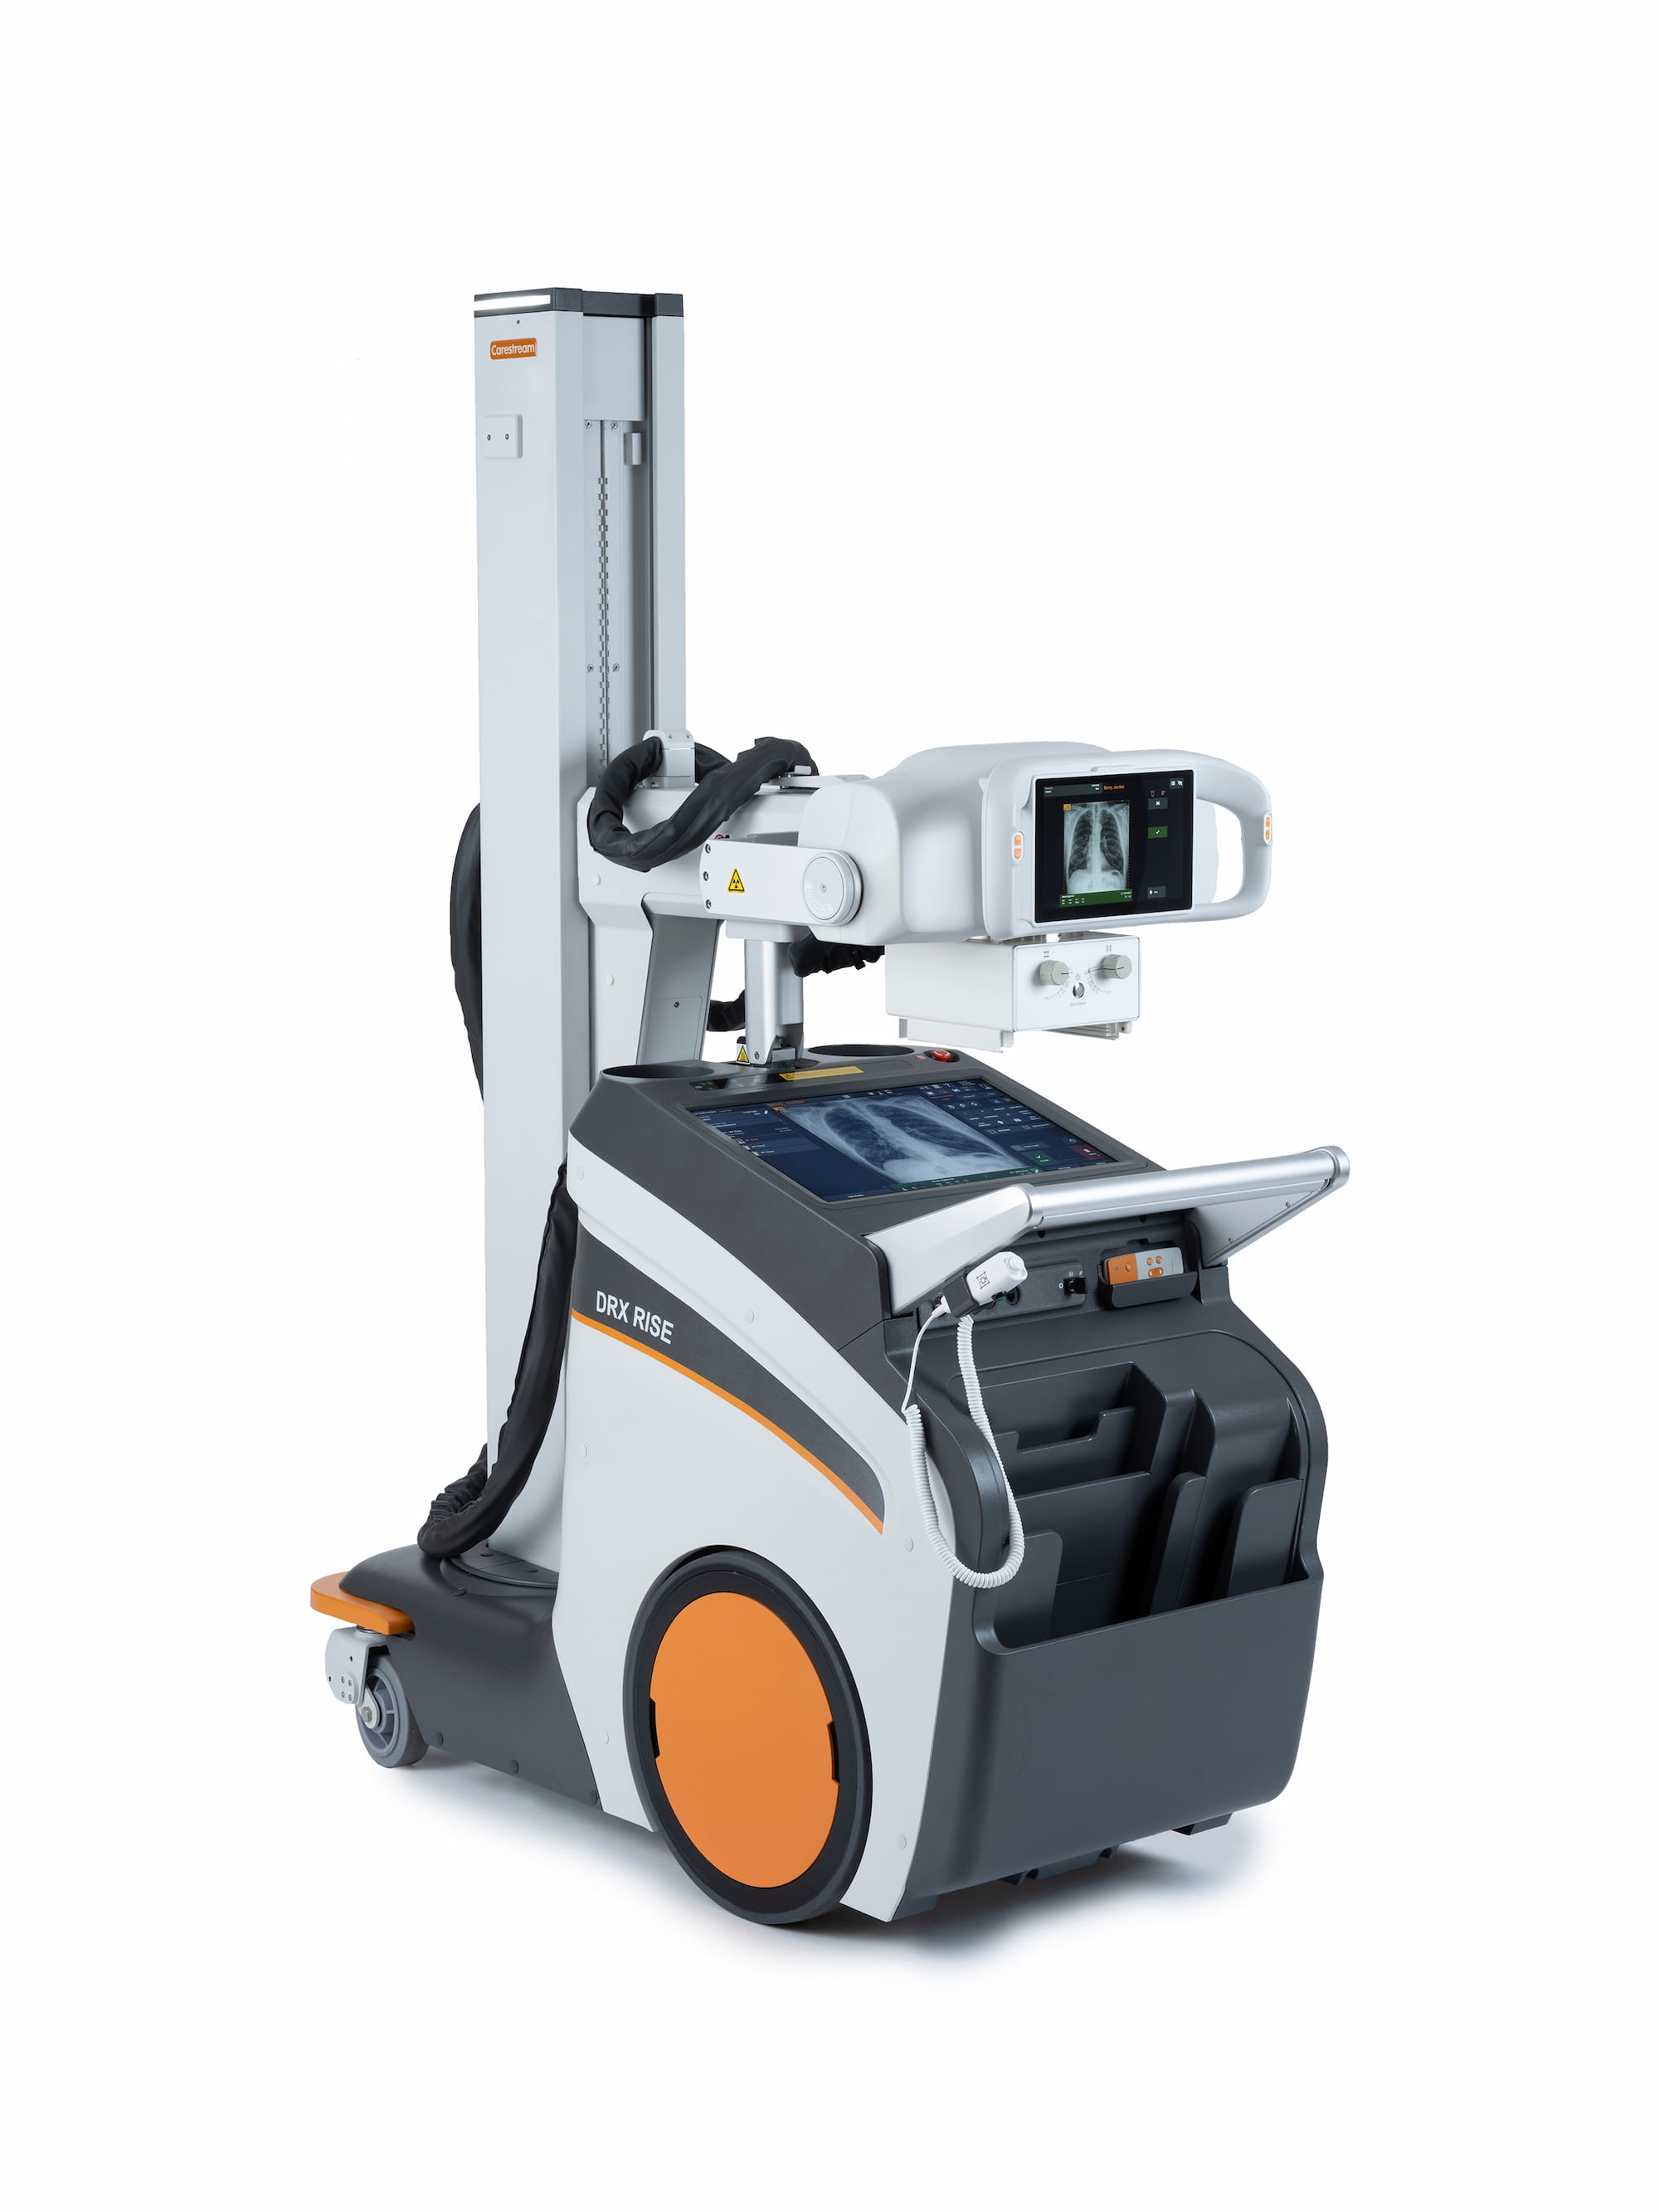 Carestream Health Introduces New Mobile X-Ray Device